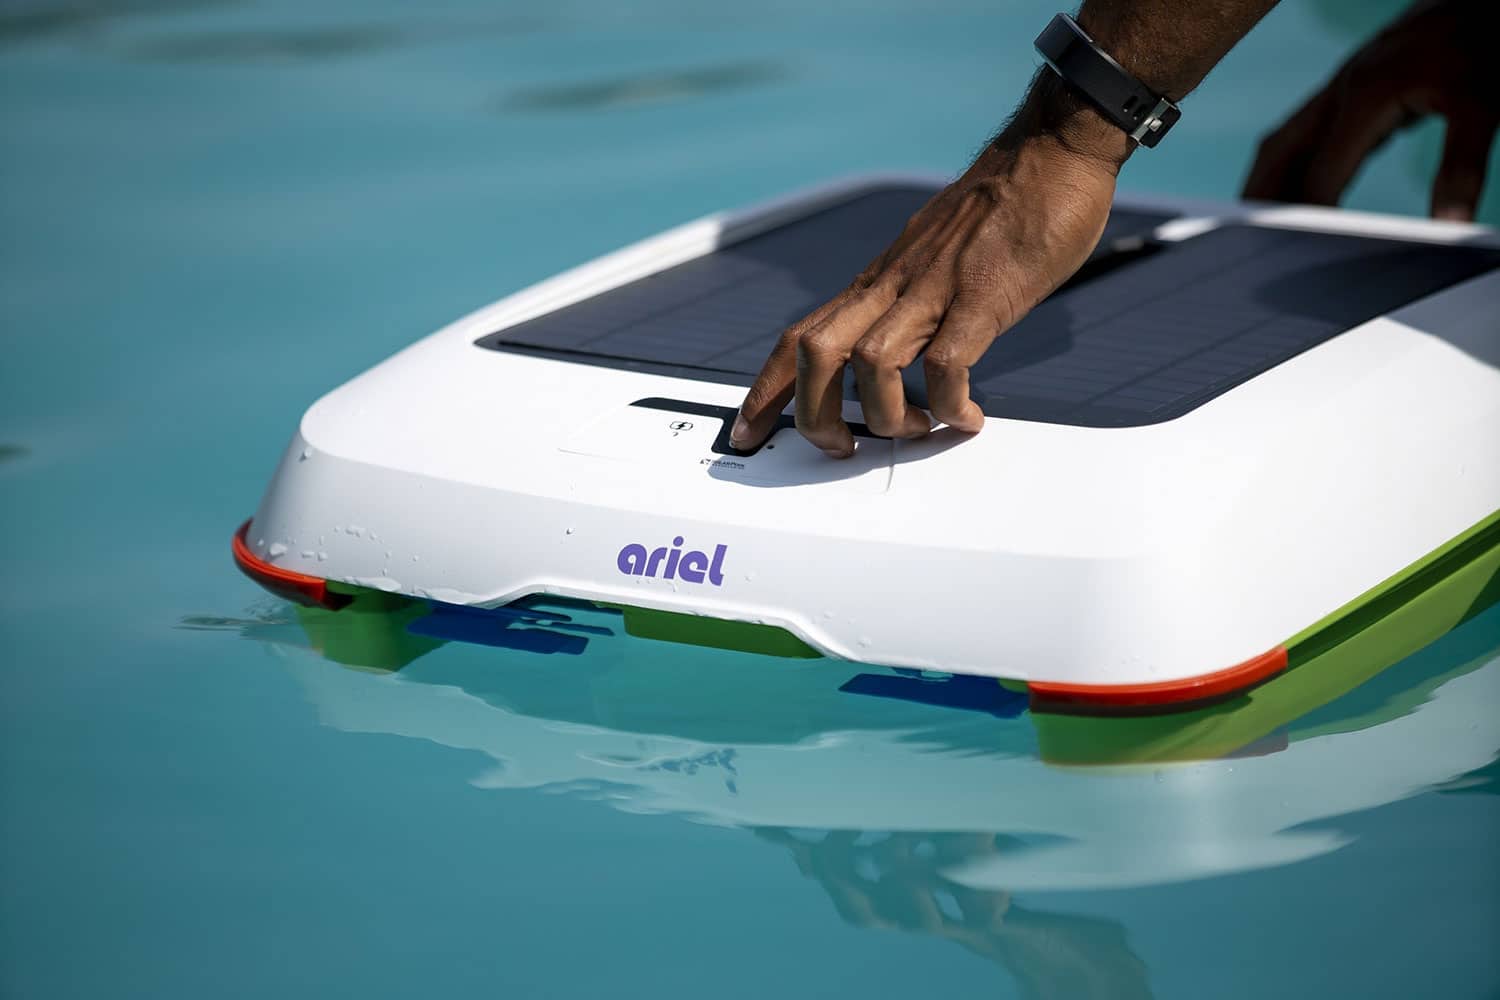 A solar-powered Ariel robot pool cleaner wipes out the debris.